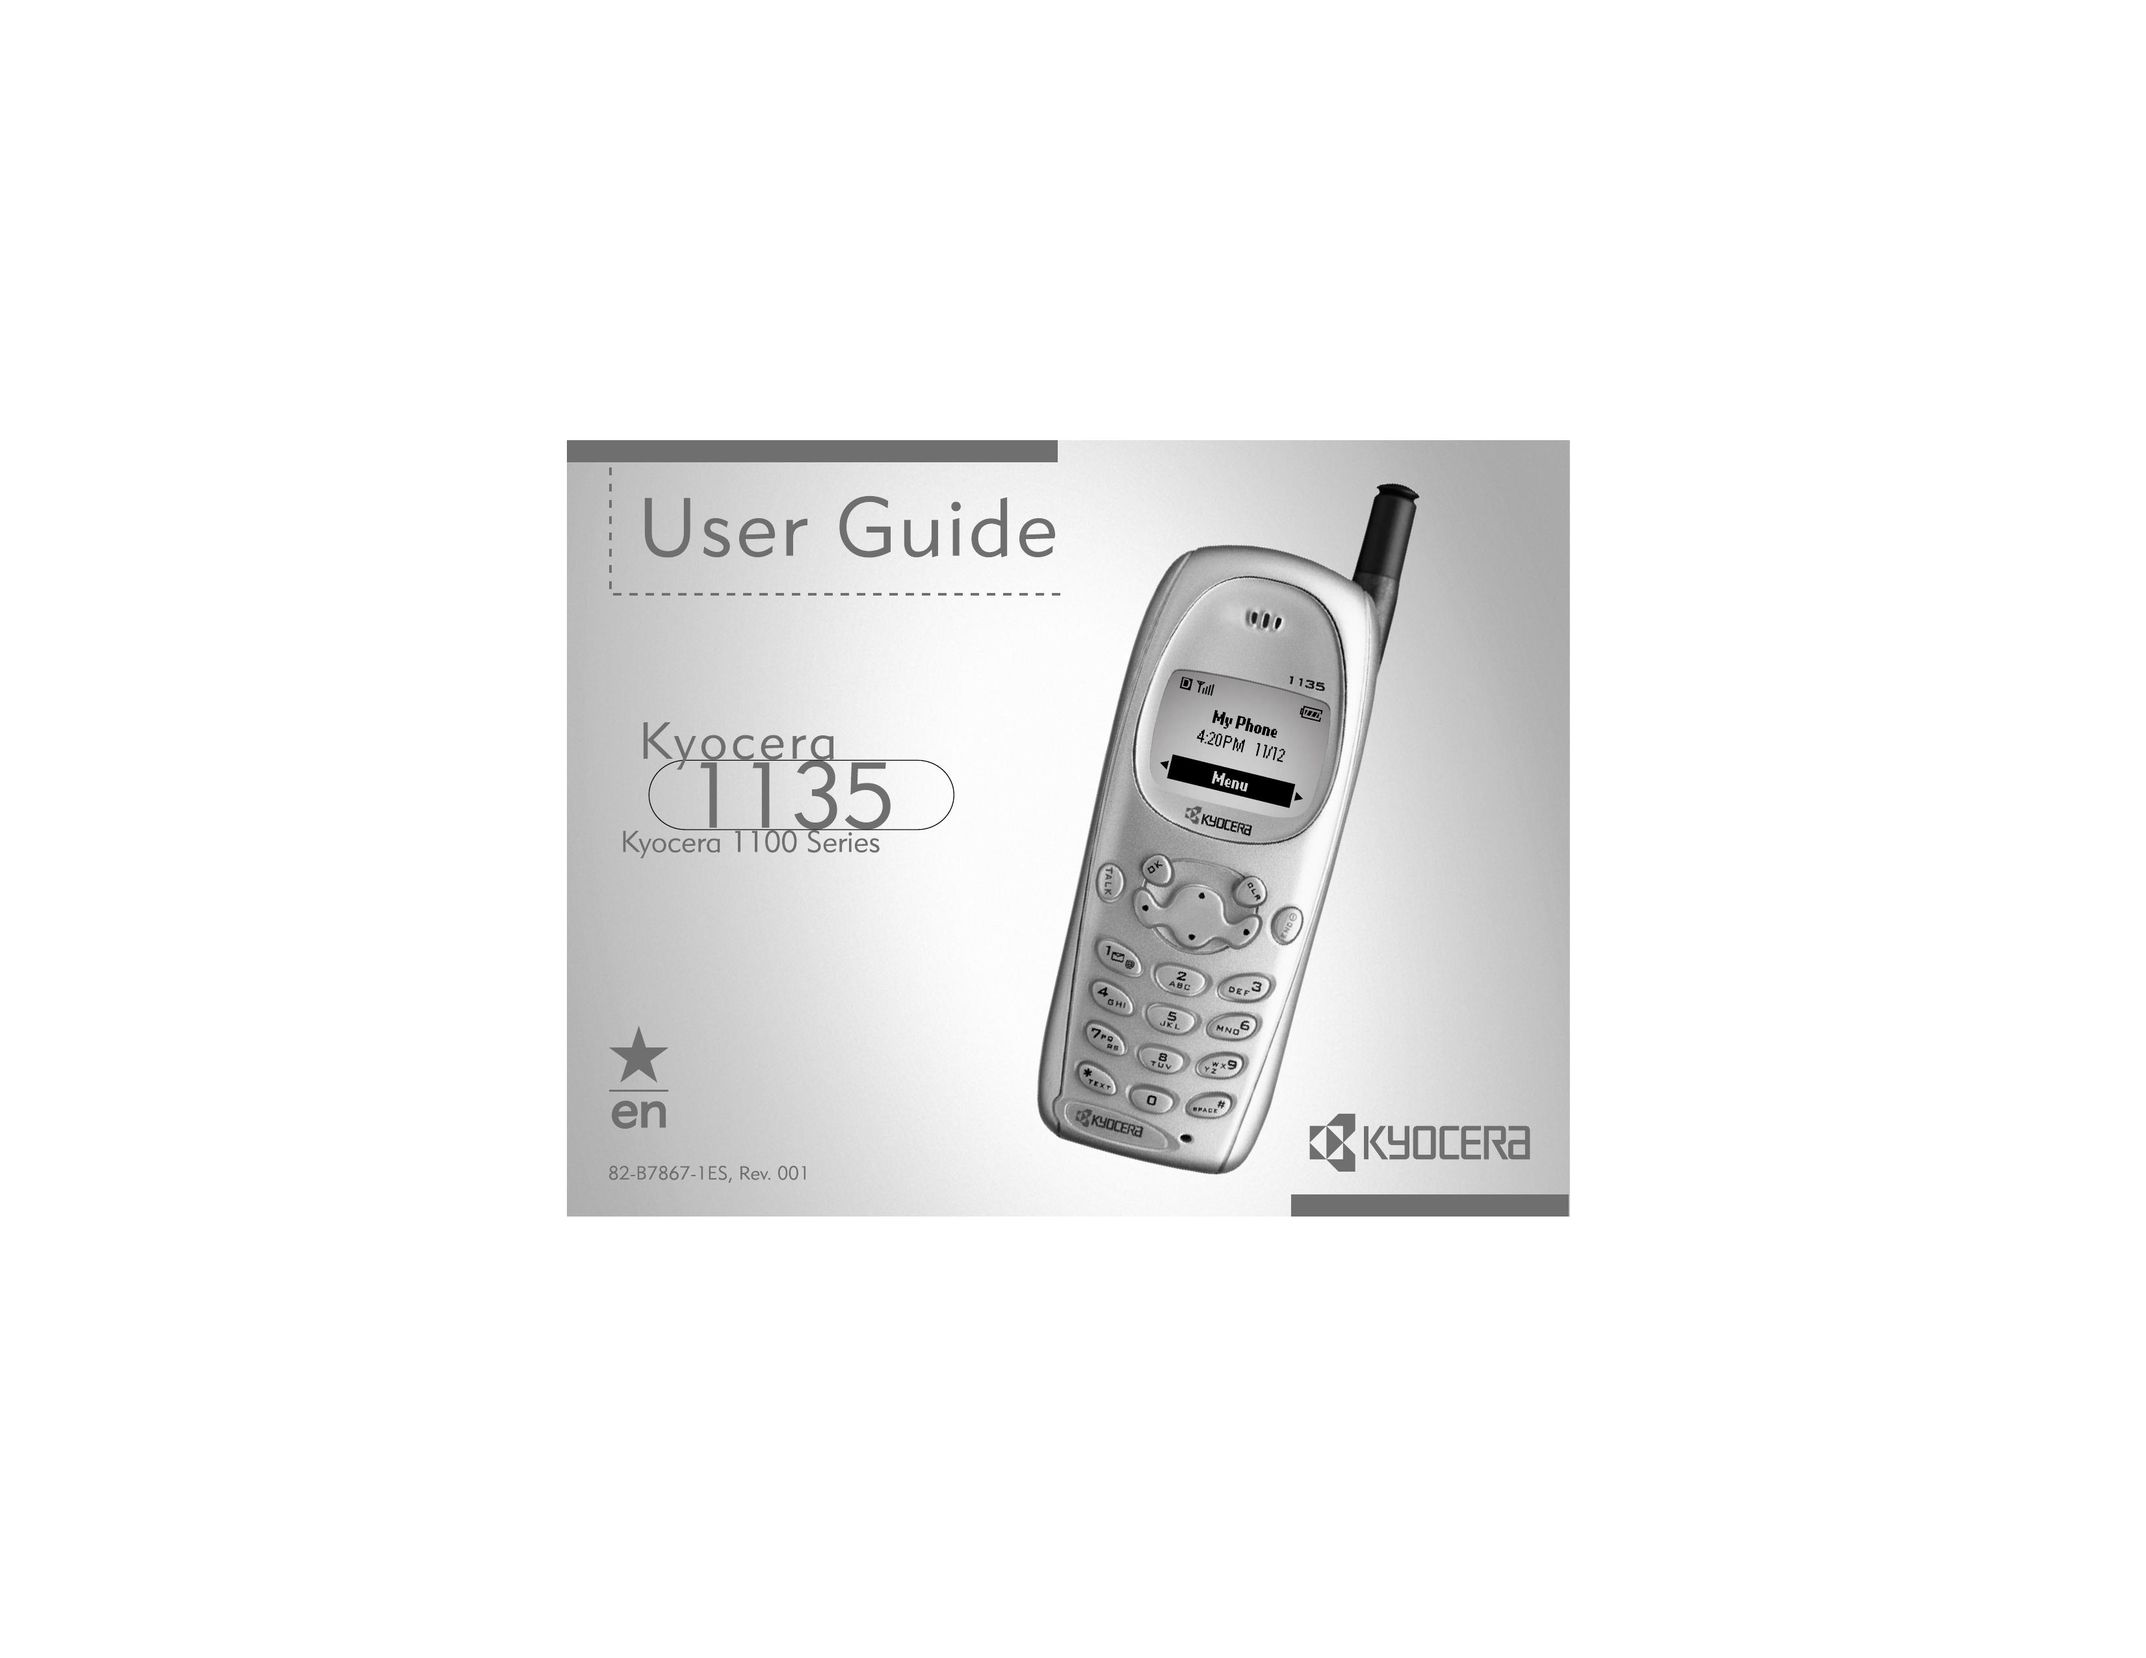 Kyocera 1100 Series Cell Phone User Manual (Page 1)